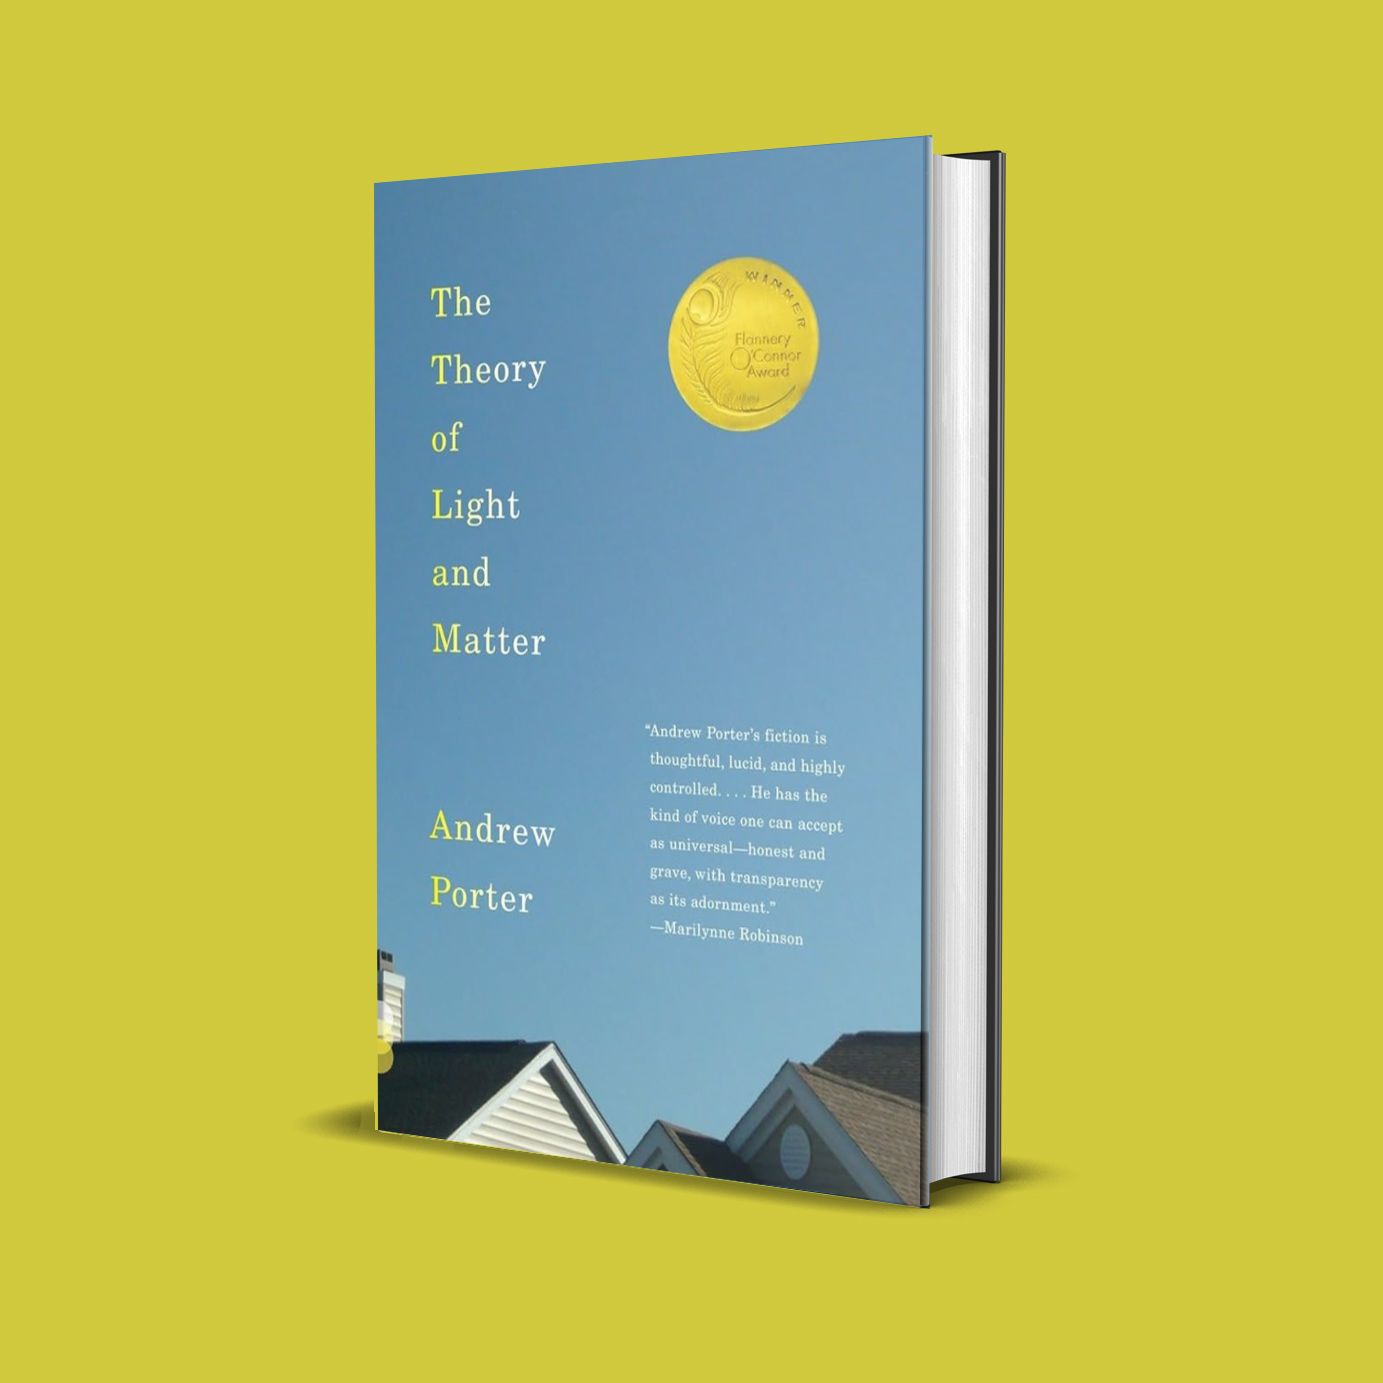 The Theory of Light and Matter by Andrew Porter